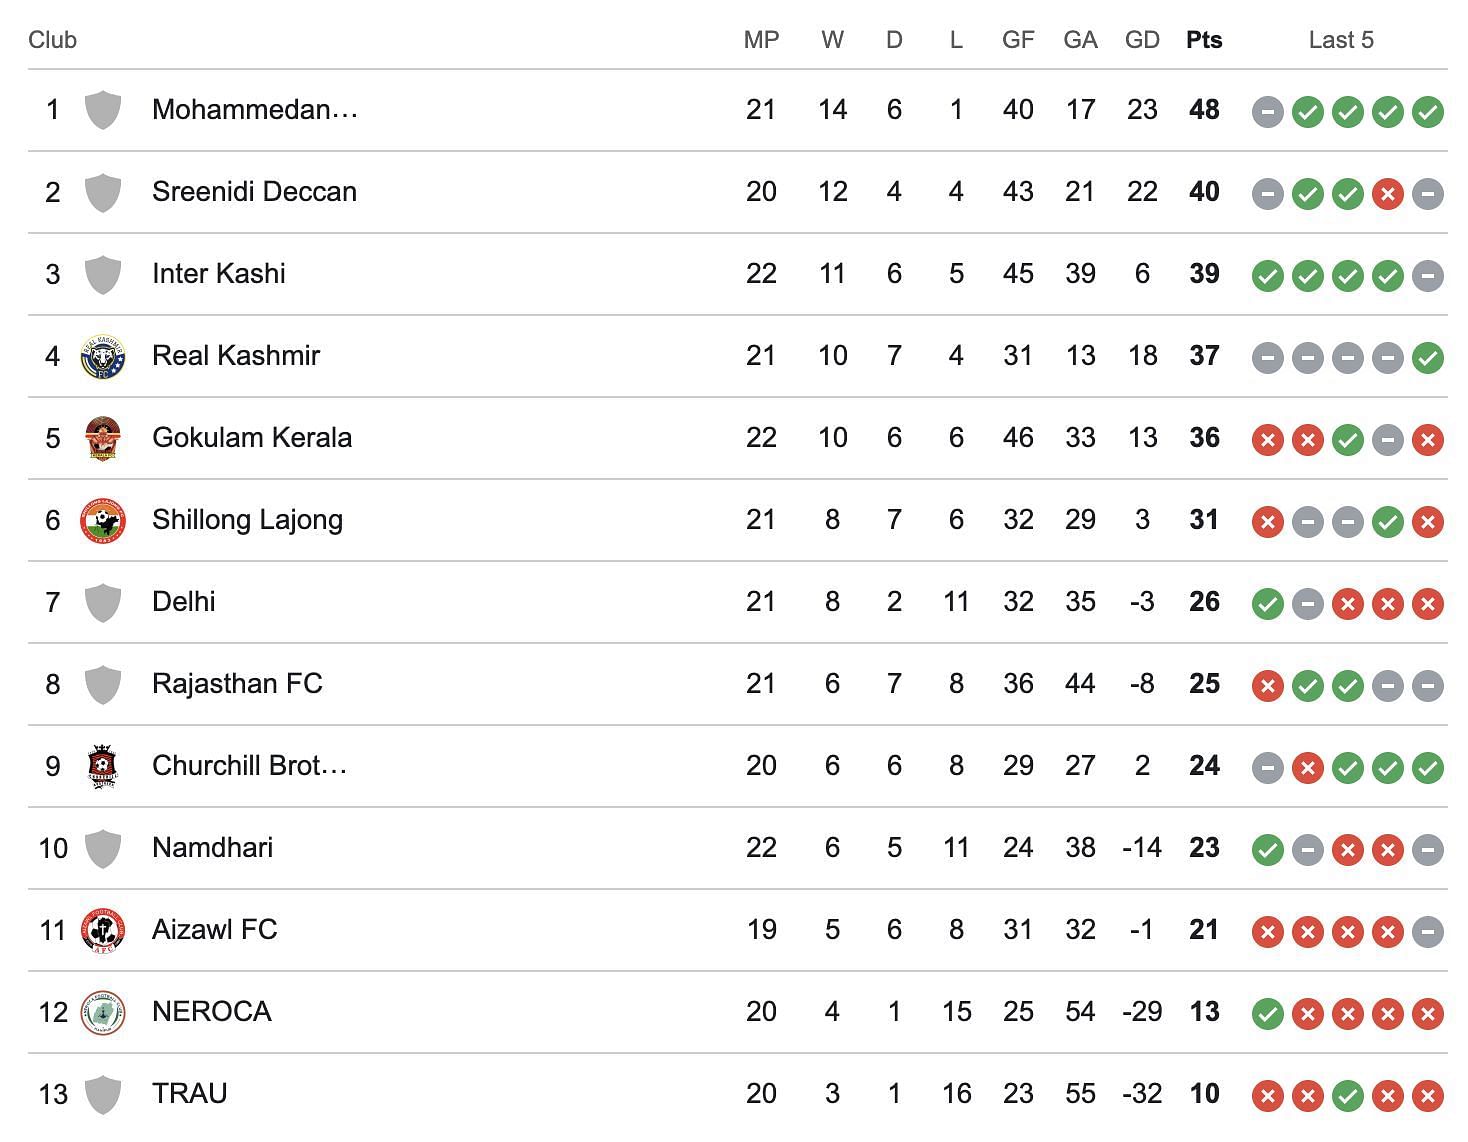 A look at the standings after the end of NEROCA vs TRAU.